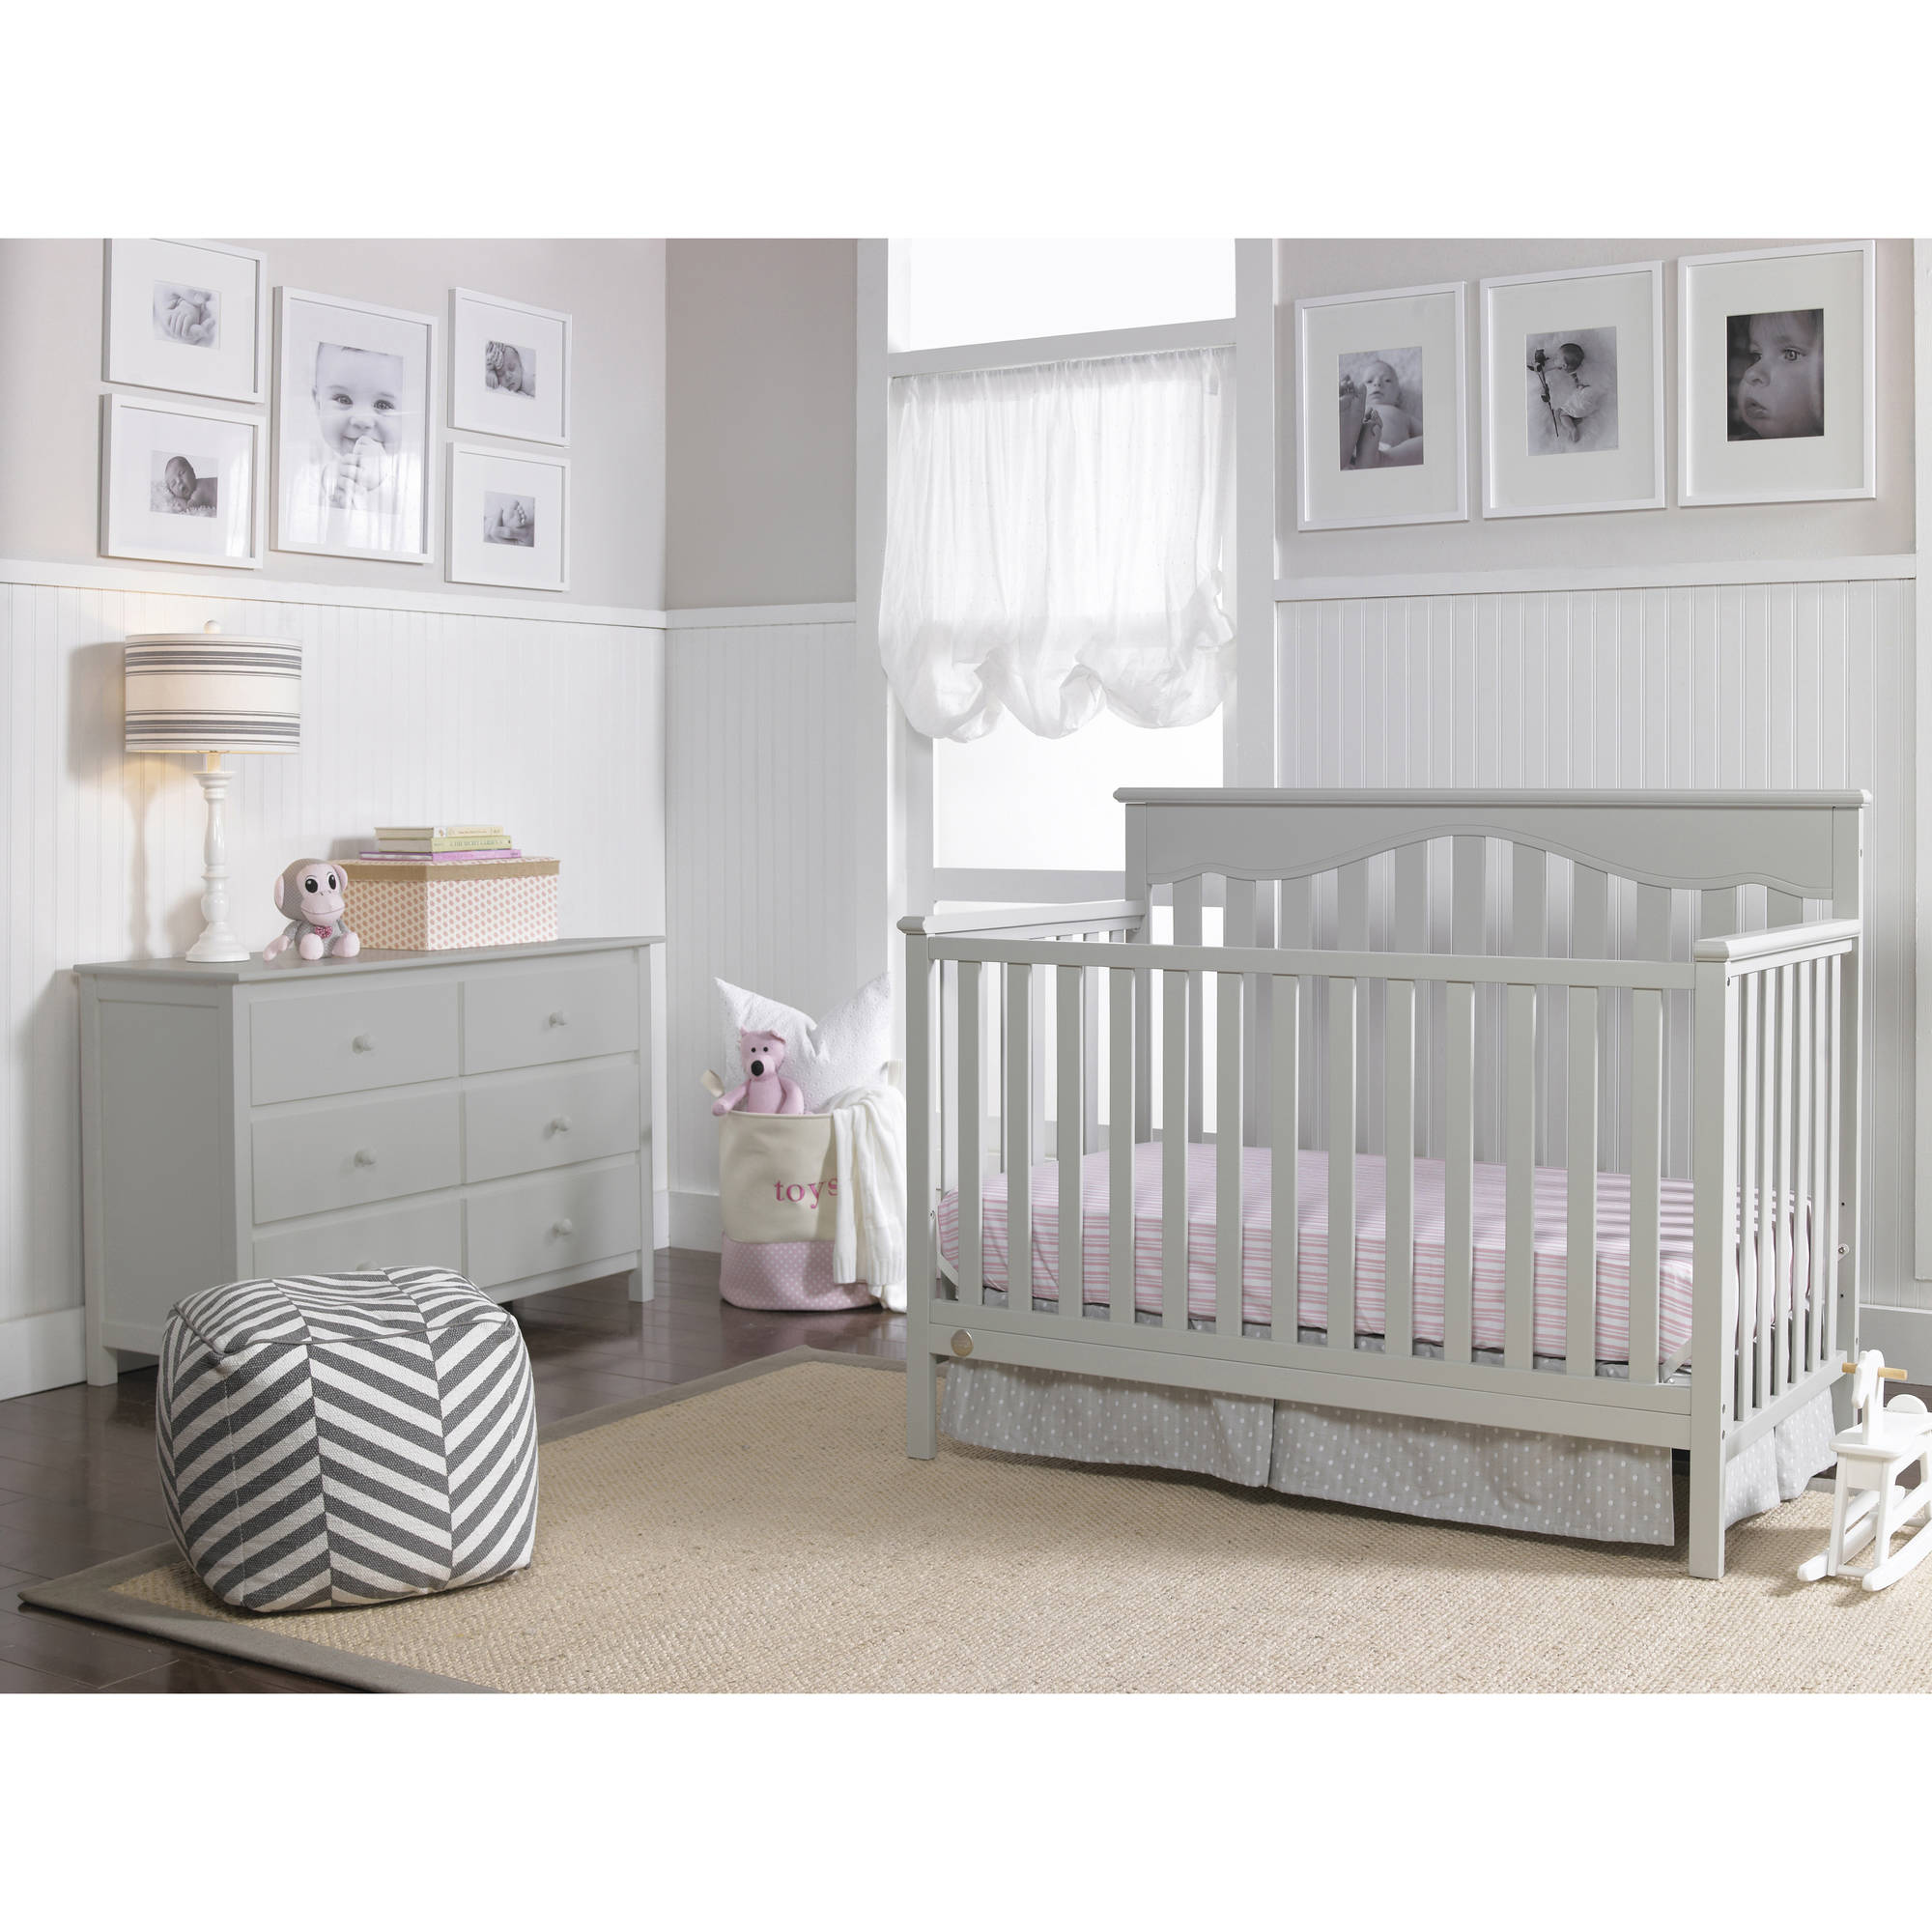 Fisher-Price Ayden 4-in-1 Fixed-Side Convertible Crib, (Choose Your Finish) - image 1 of 1